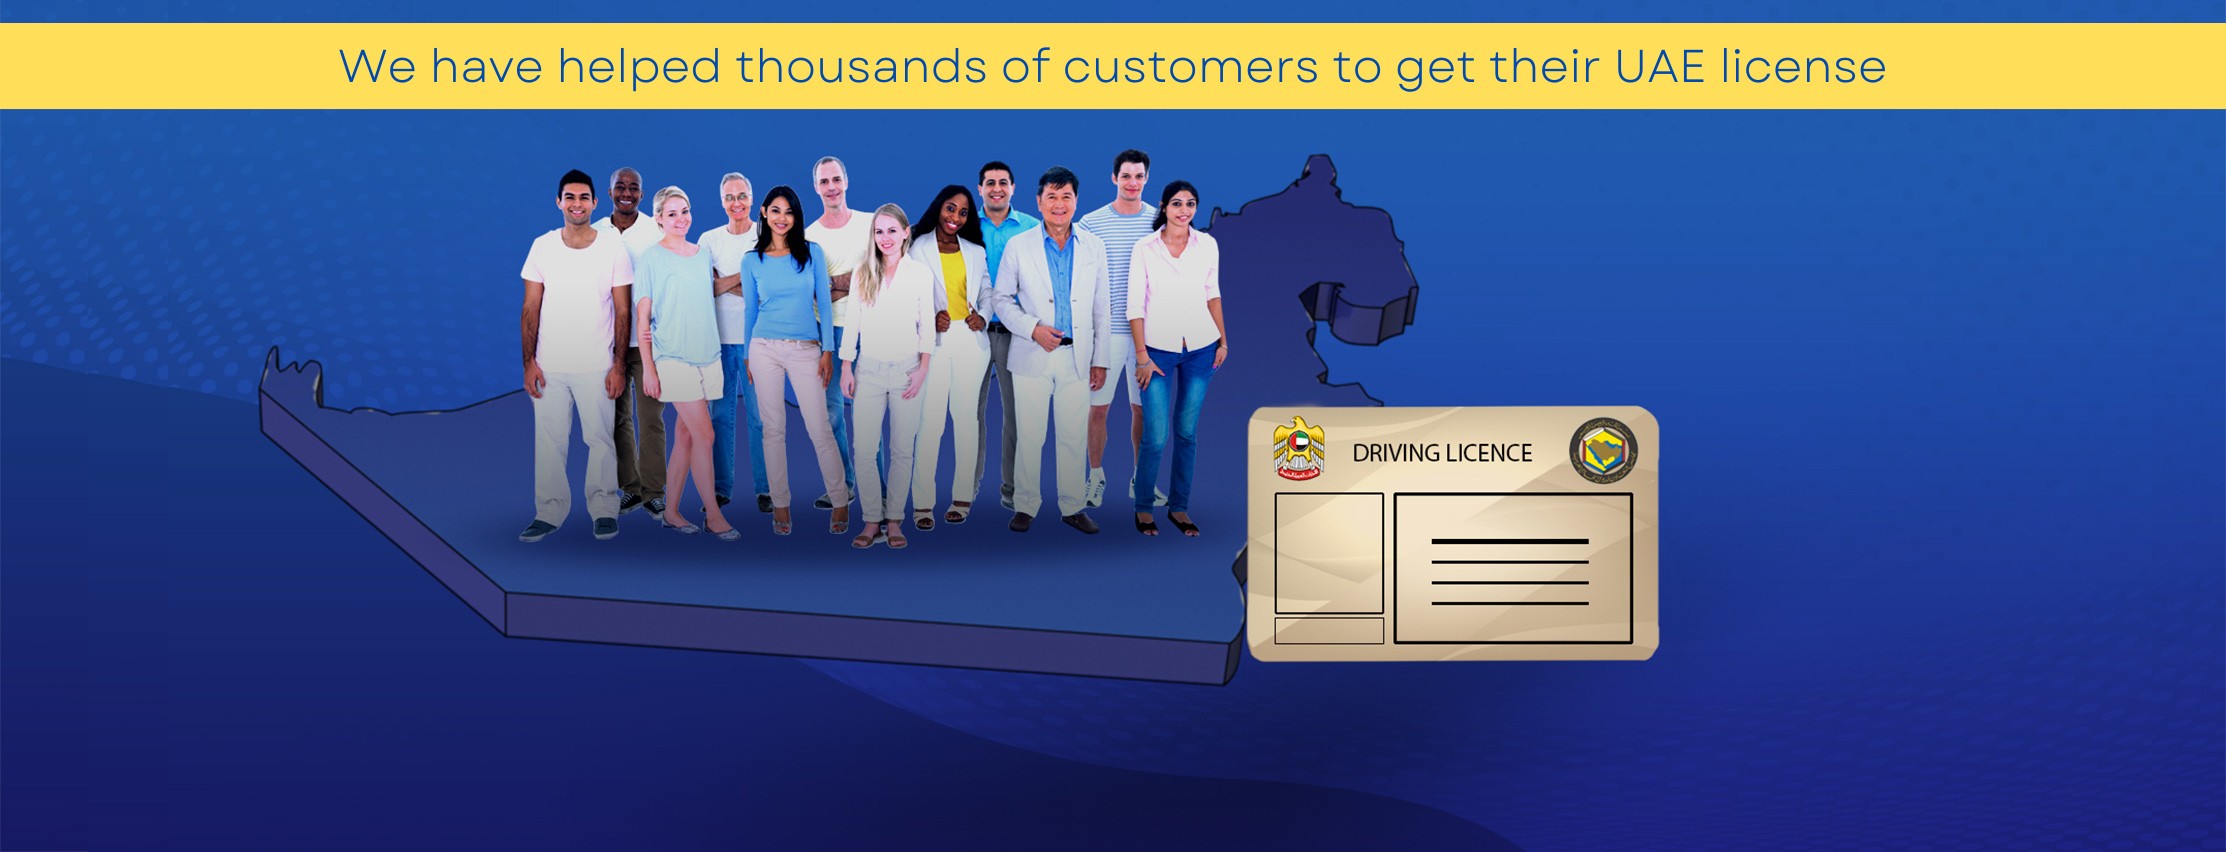 We have helped thousands of customers to get their UAE license